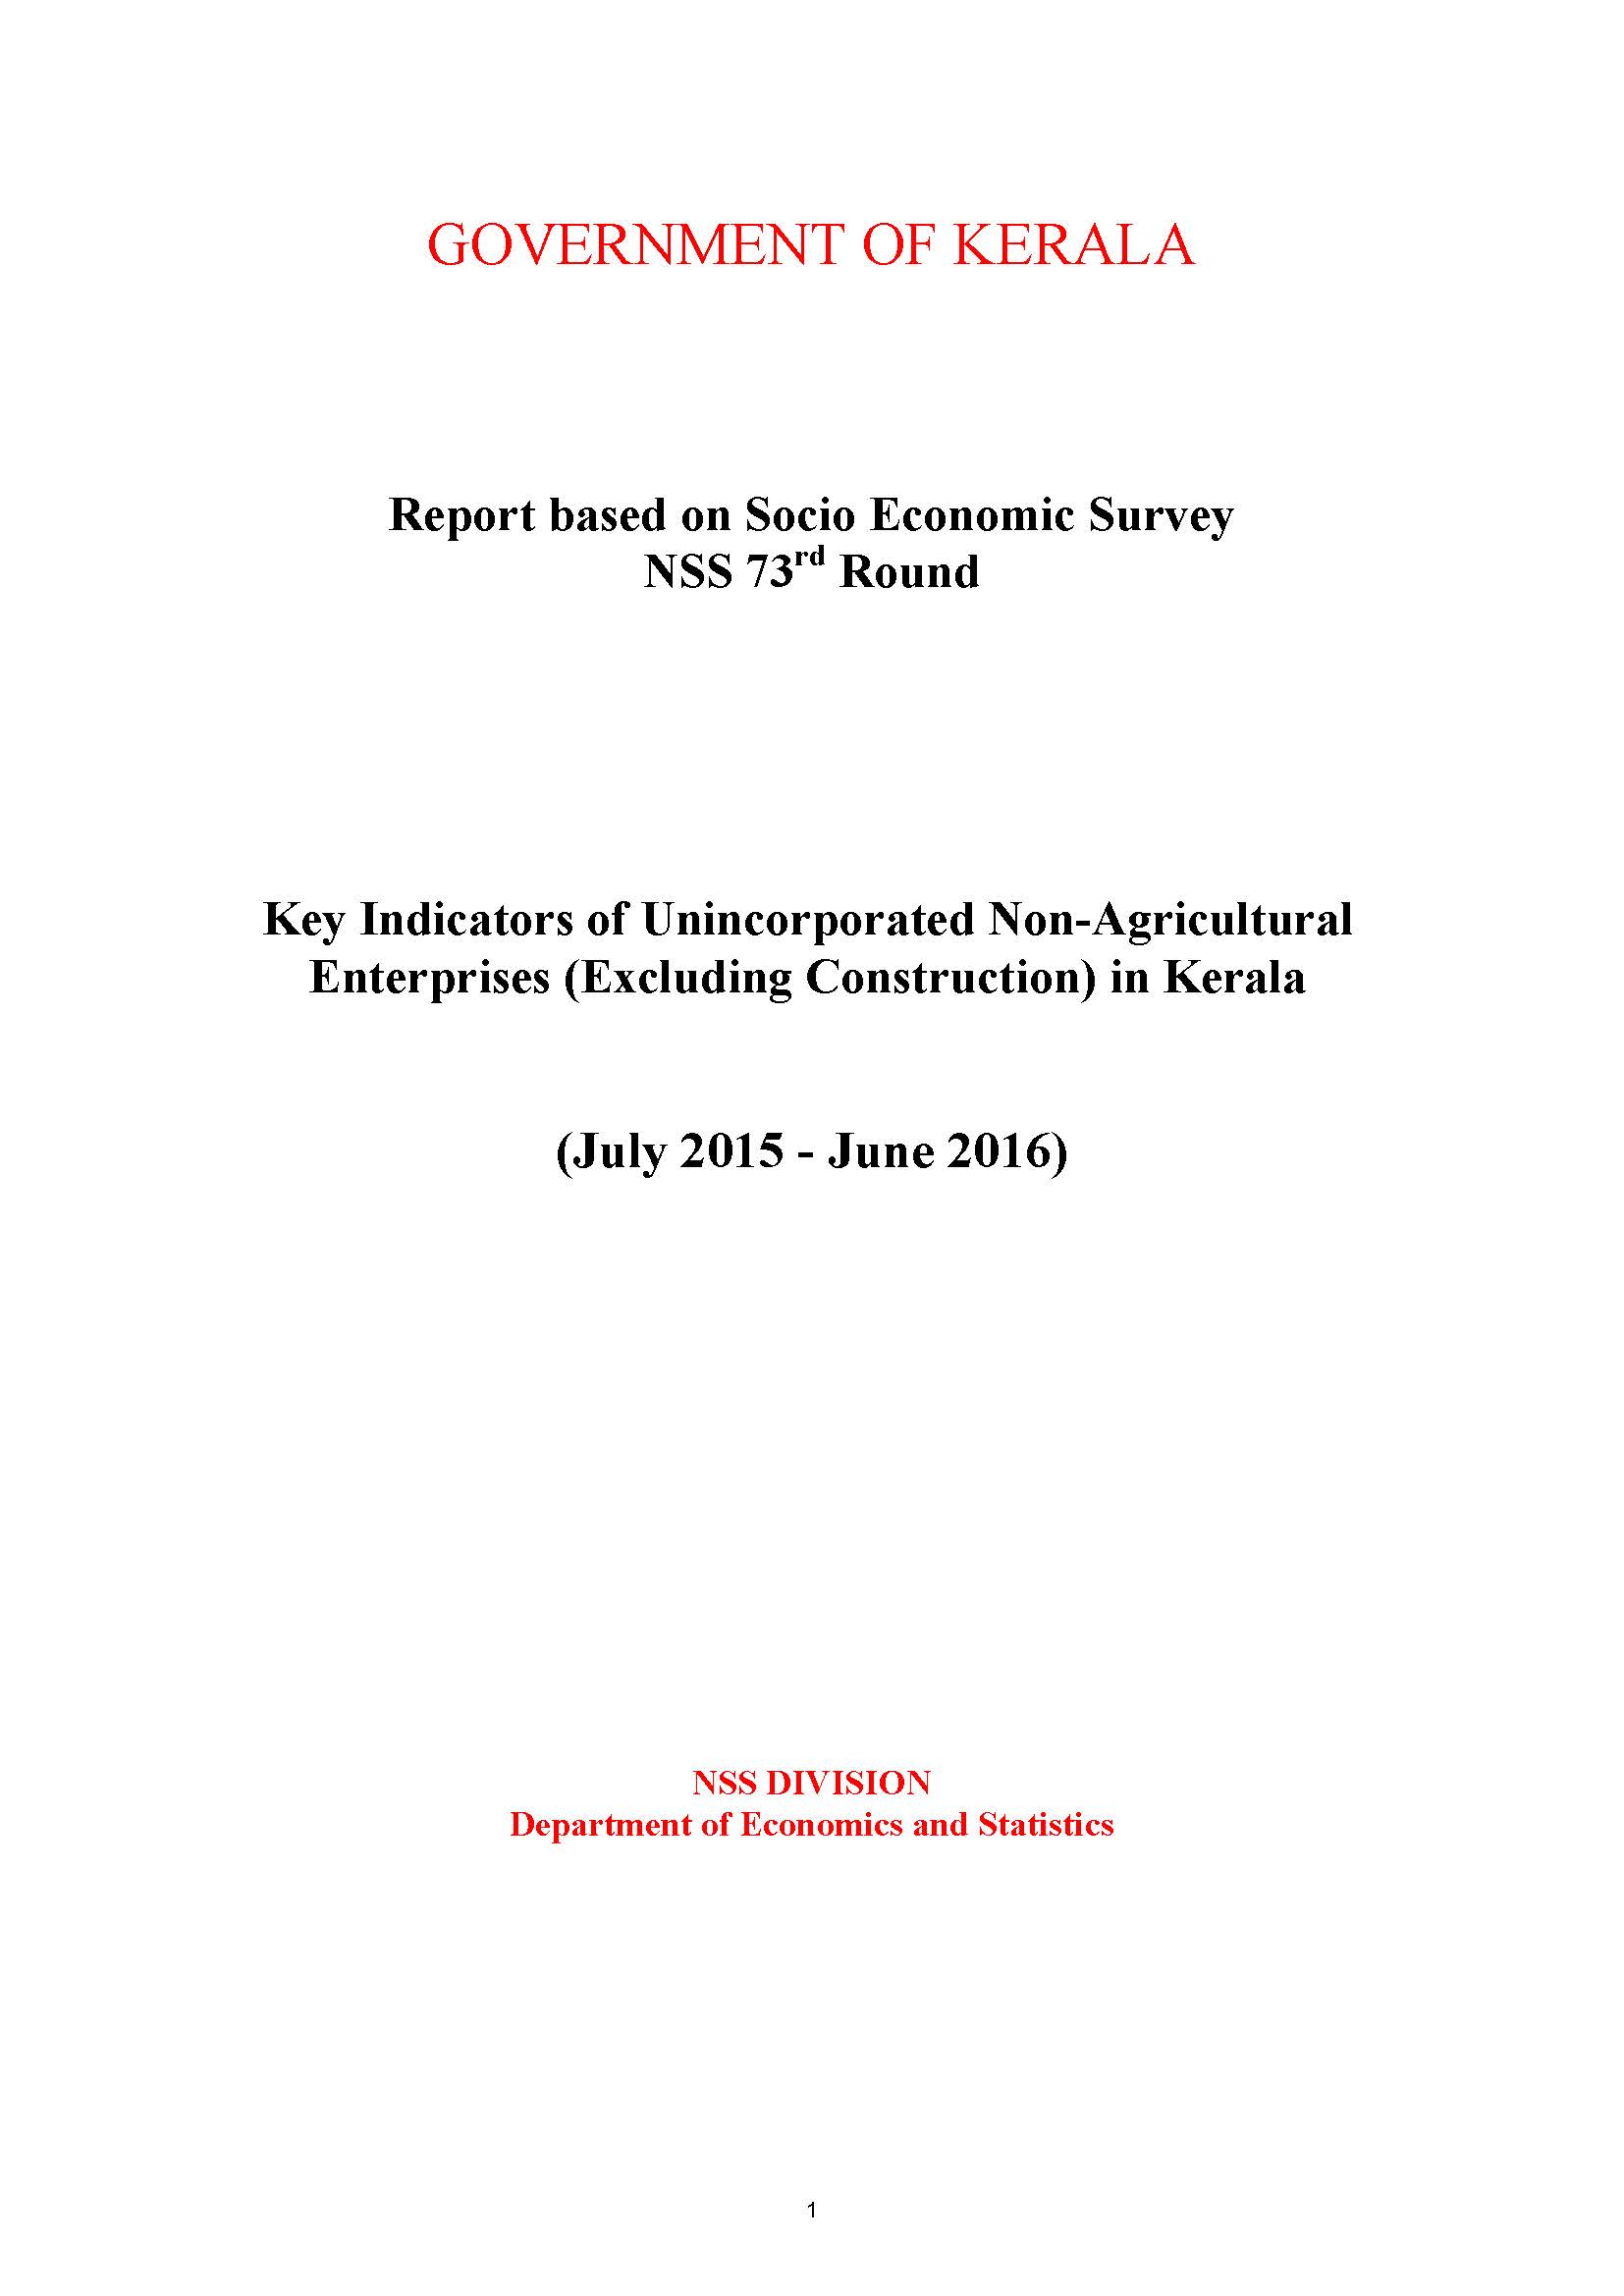 National Sample Survey 73rd Round Report